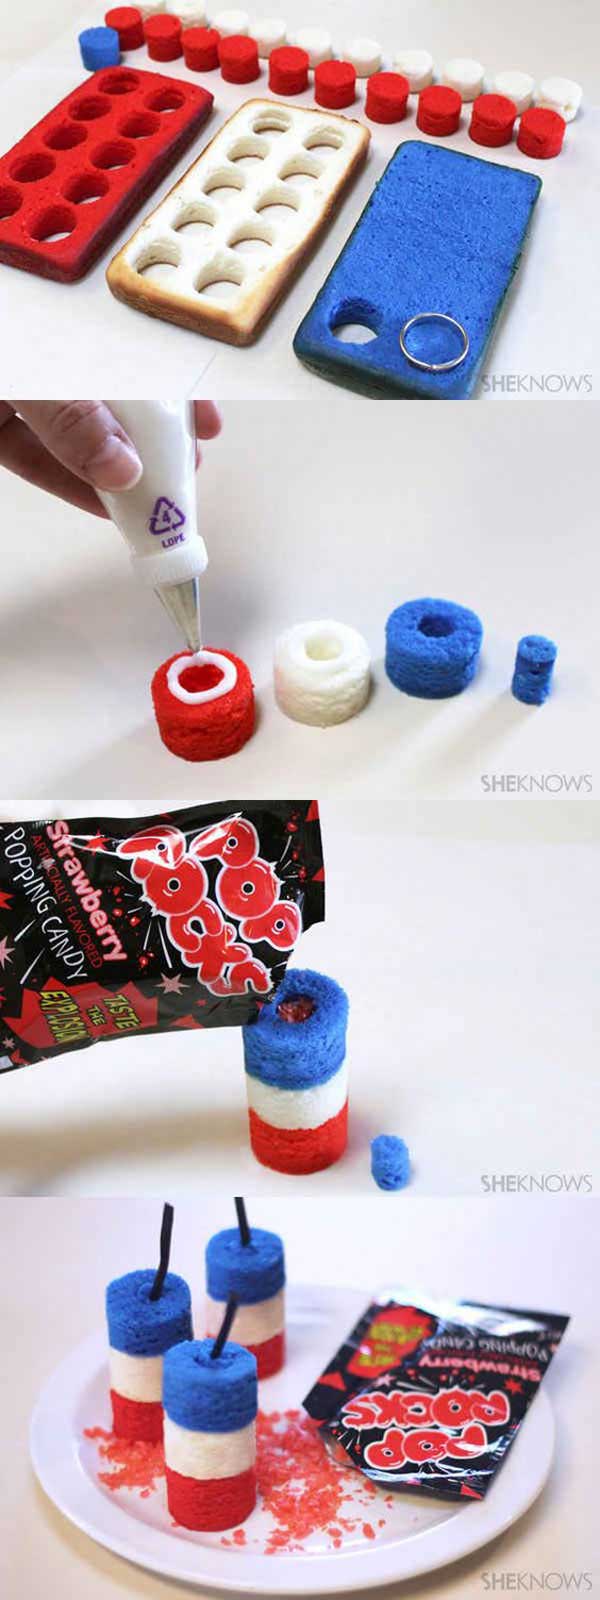 20 Easy Crafts to Keep Kids Busy on 4th of July - Amazing DIY, Interior